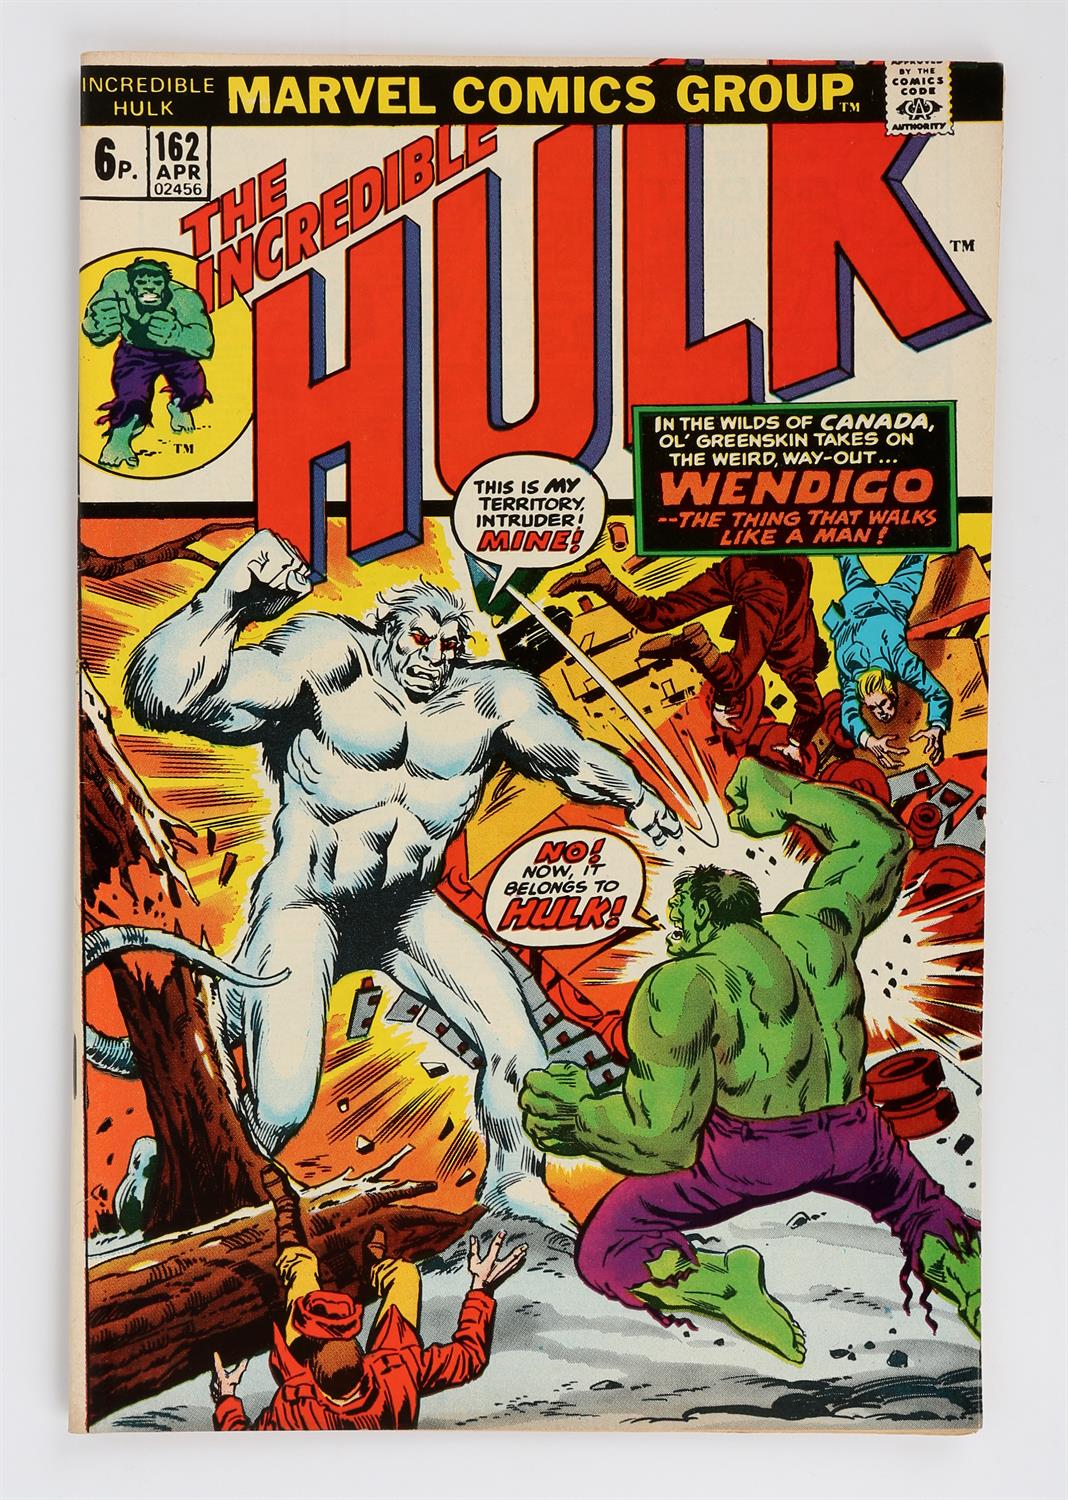 Marvel Comics: The Incredible Hulk No. 162 featuring 1st appearance of The Wendigo (1971 onwards).